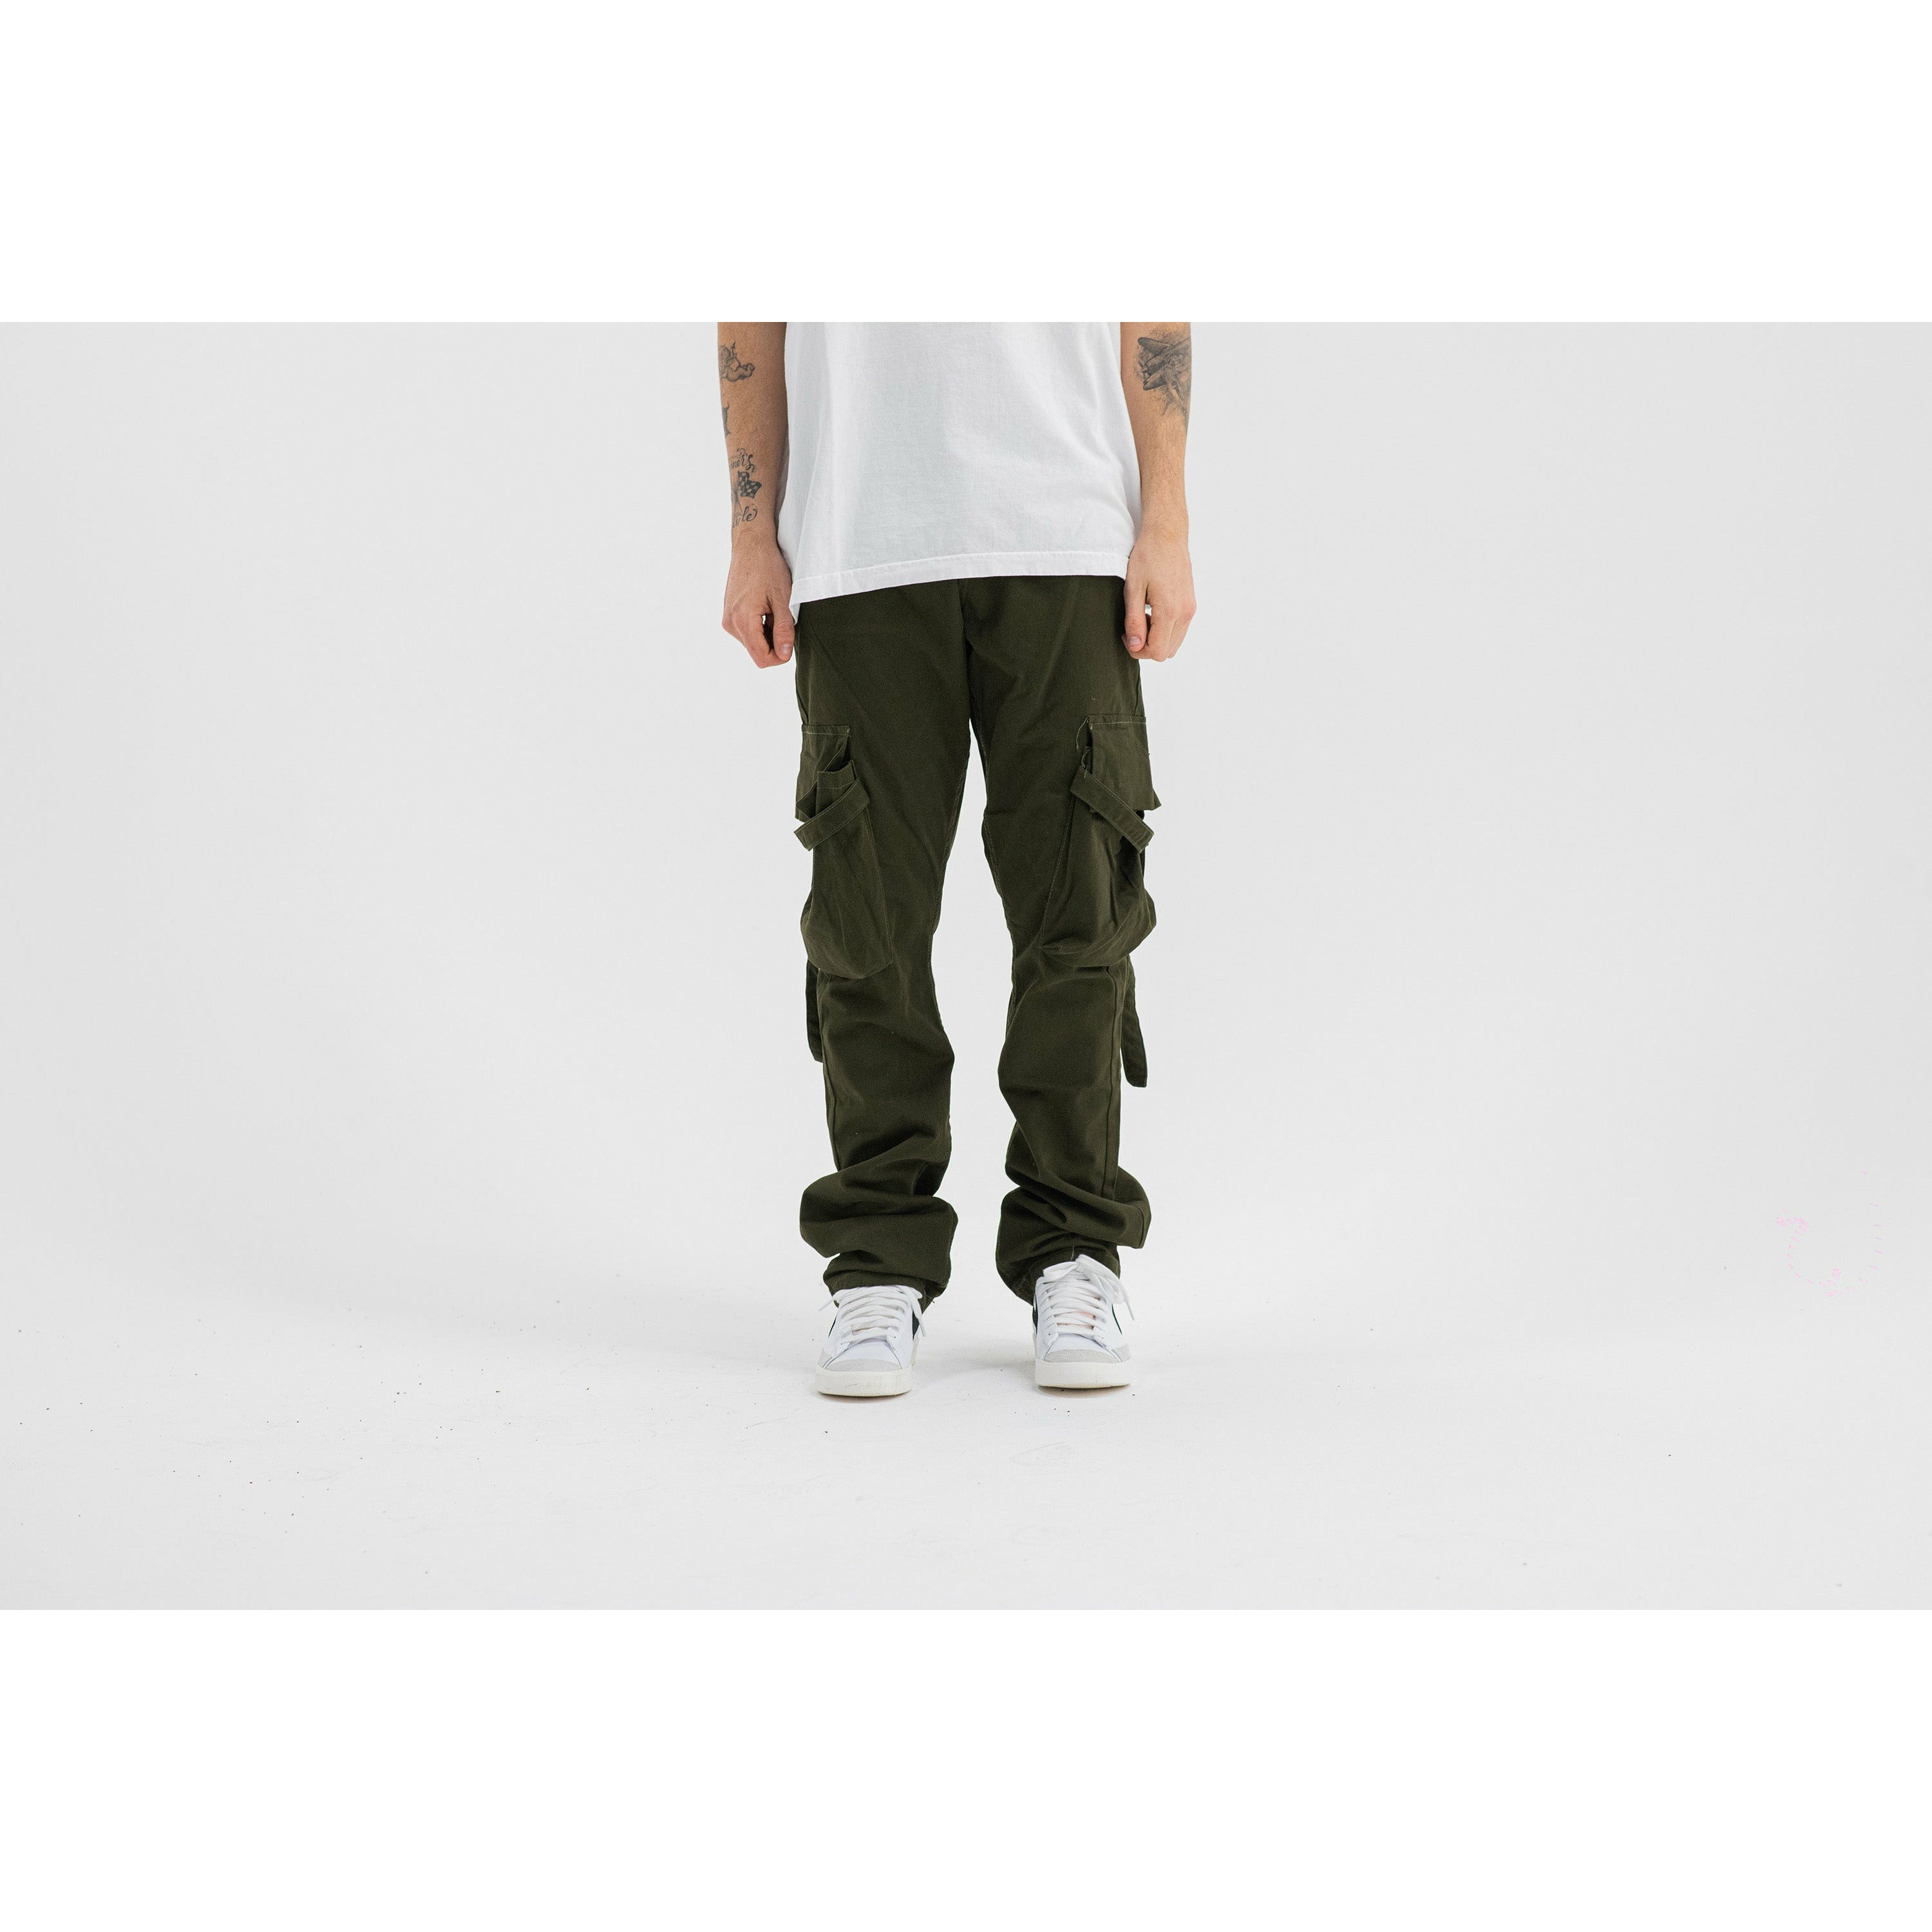 Uniform Strapped Cargos (Deep Olive)